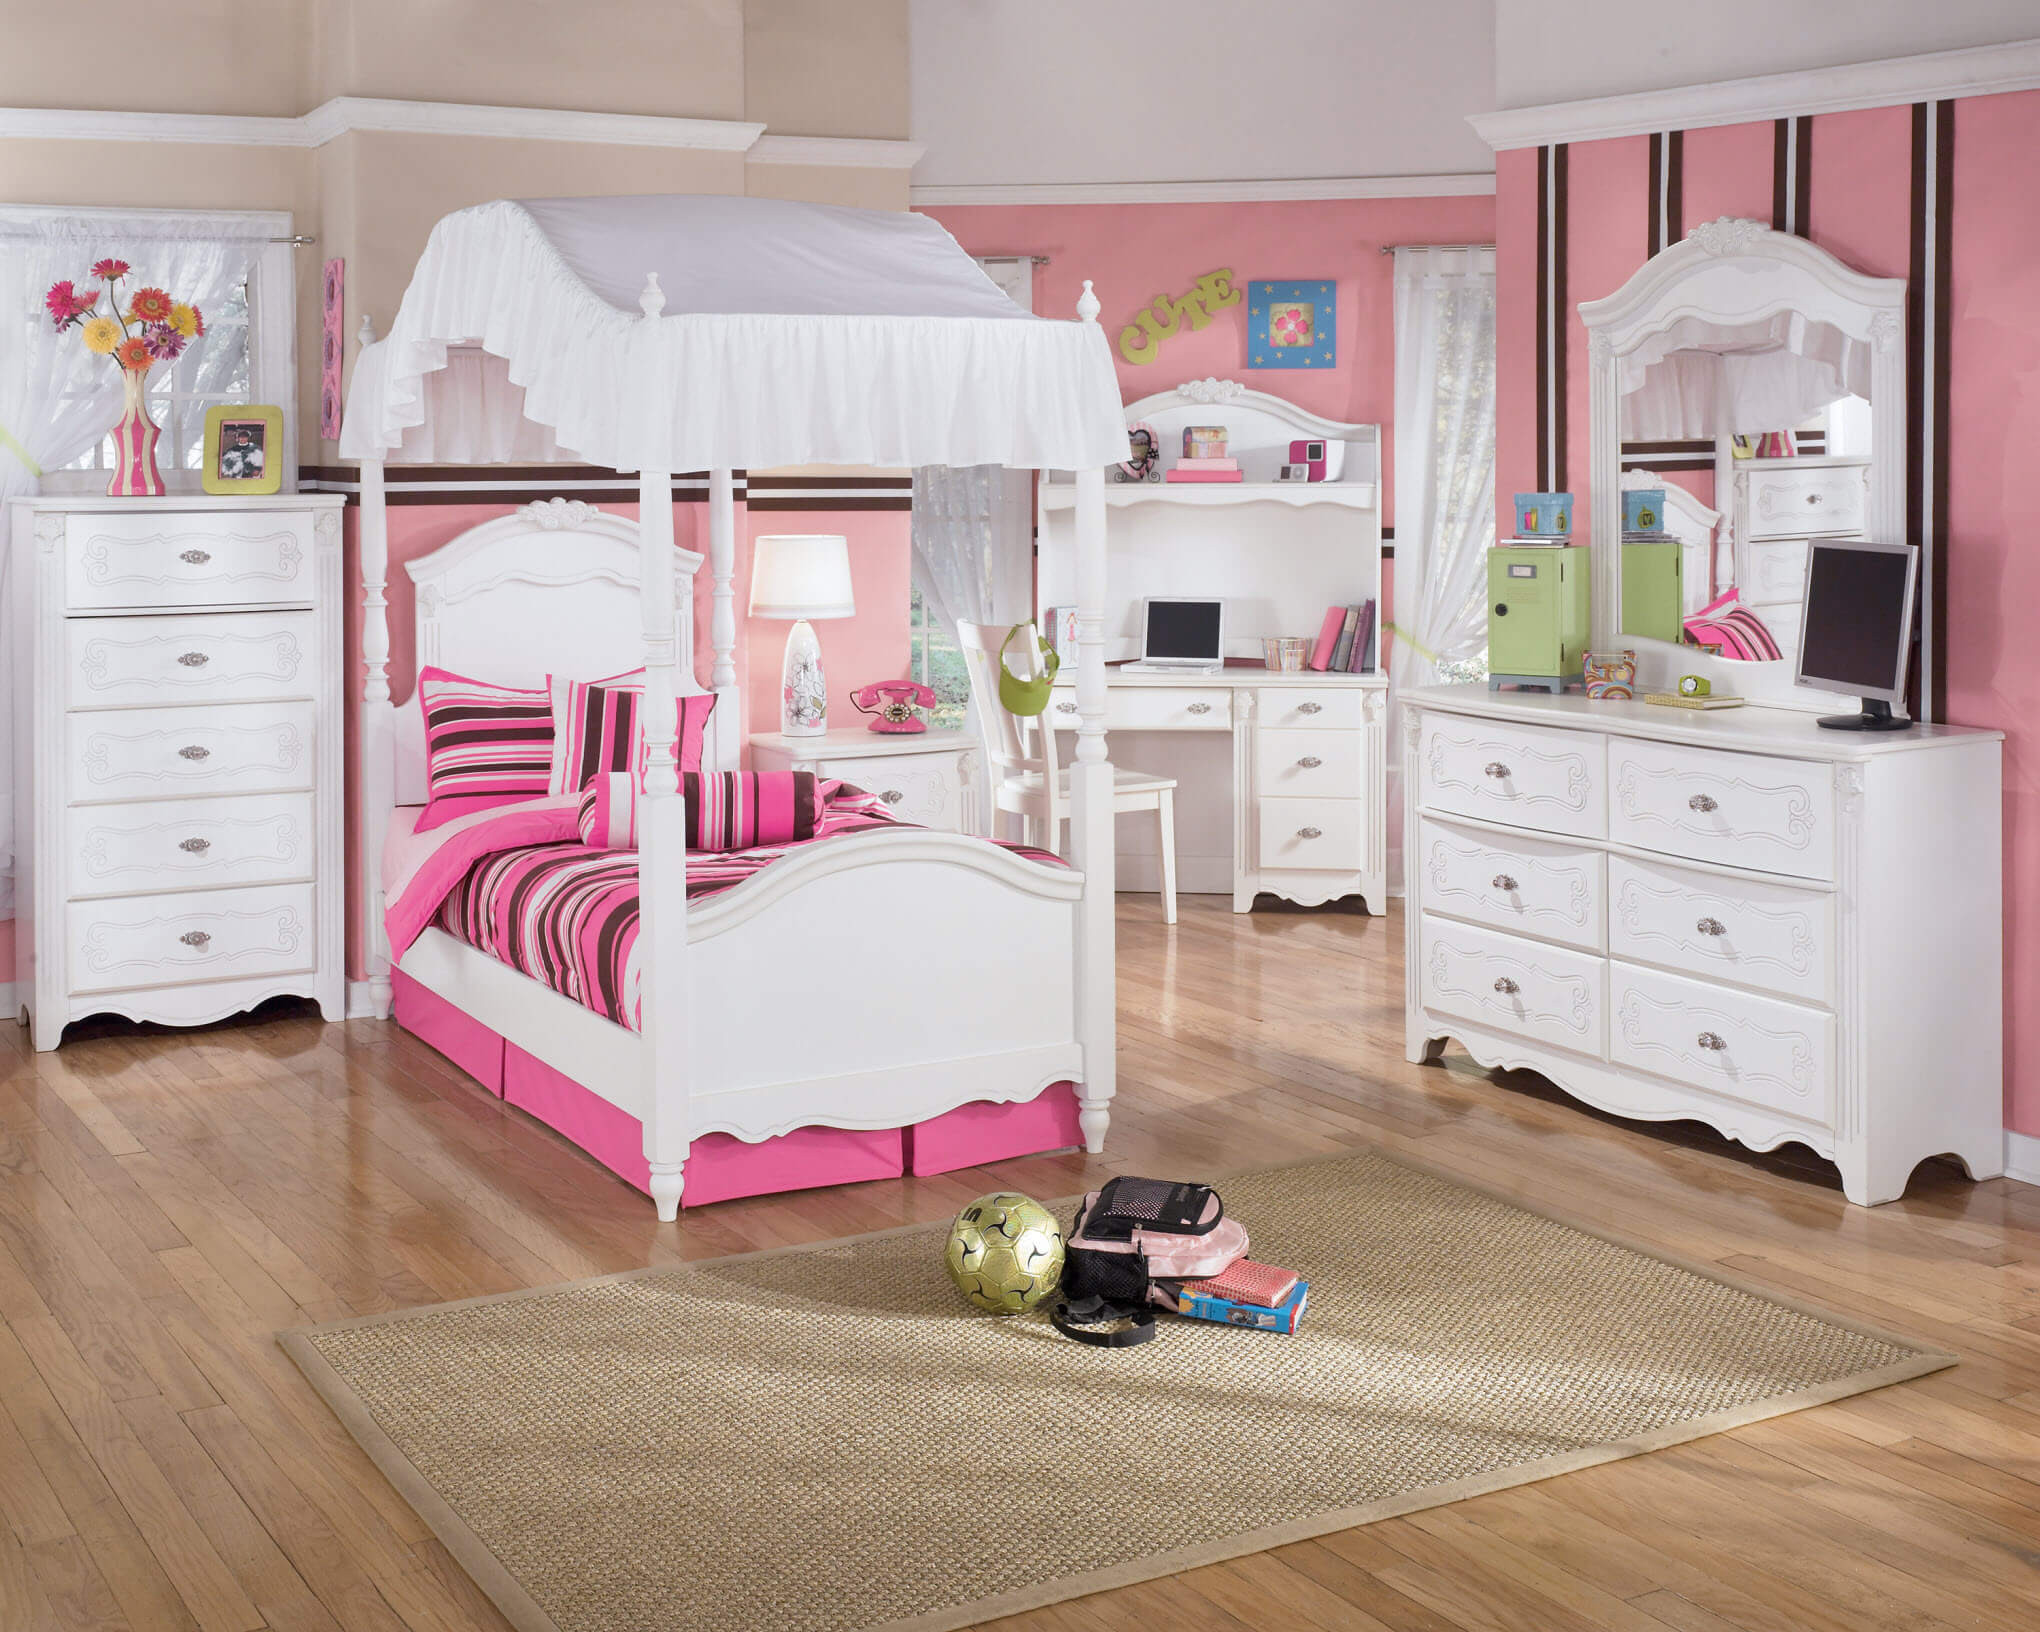 Girls Bedroom Furnature
 25 Romantic and Modern Ideas for Girls Bedroom Sets